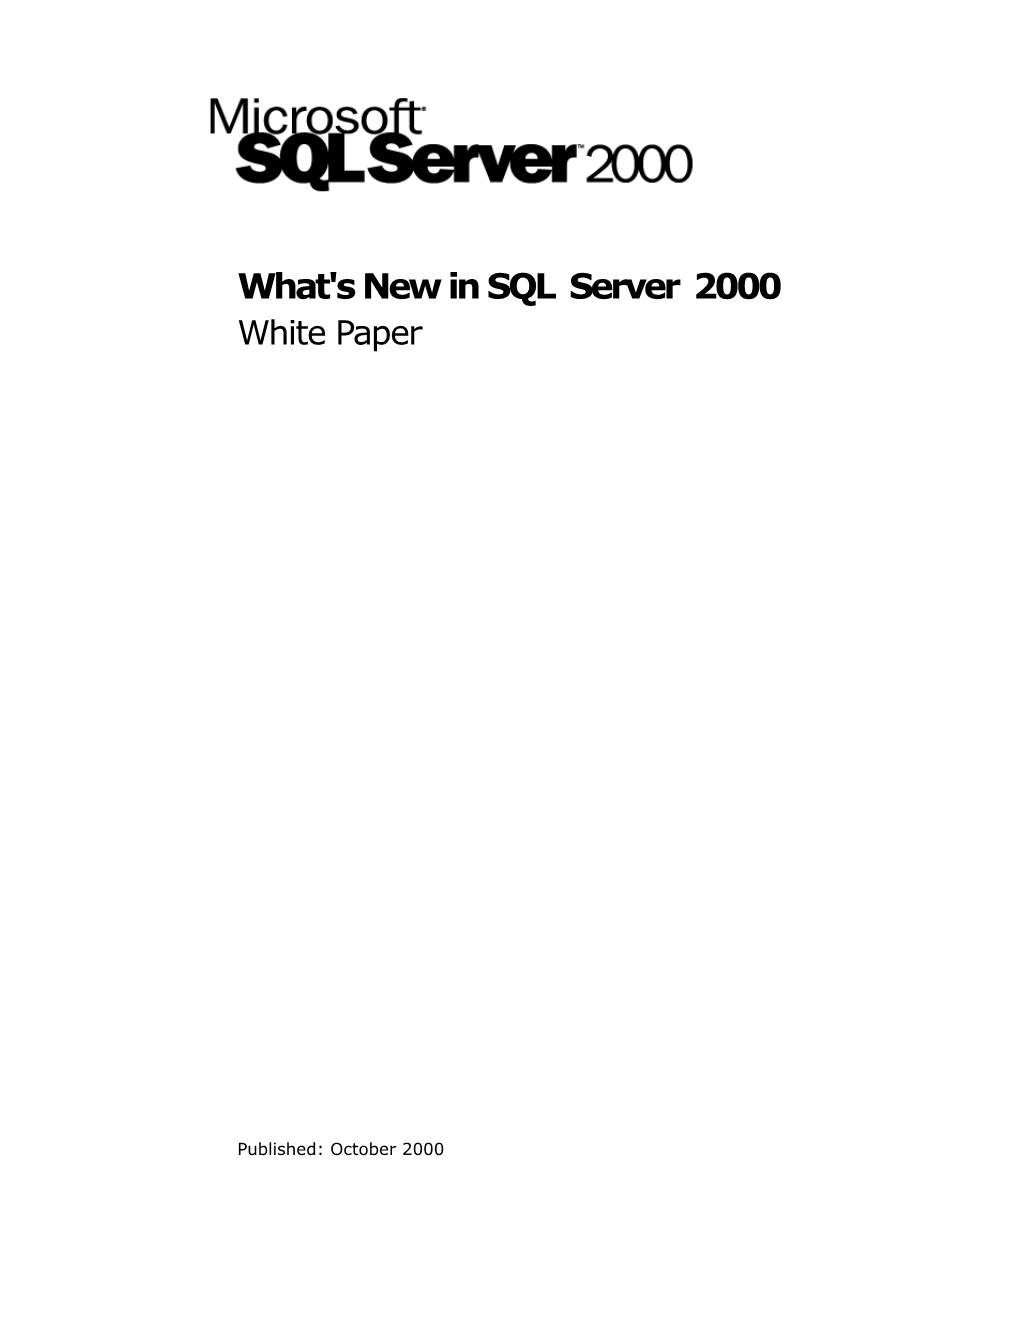 What's New in Sqlserver2000